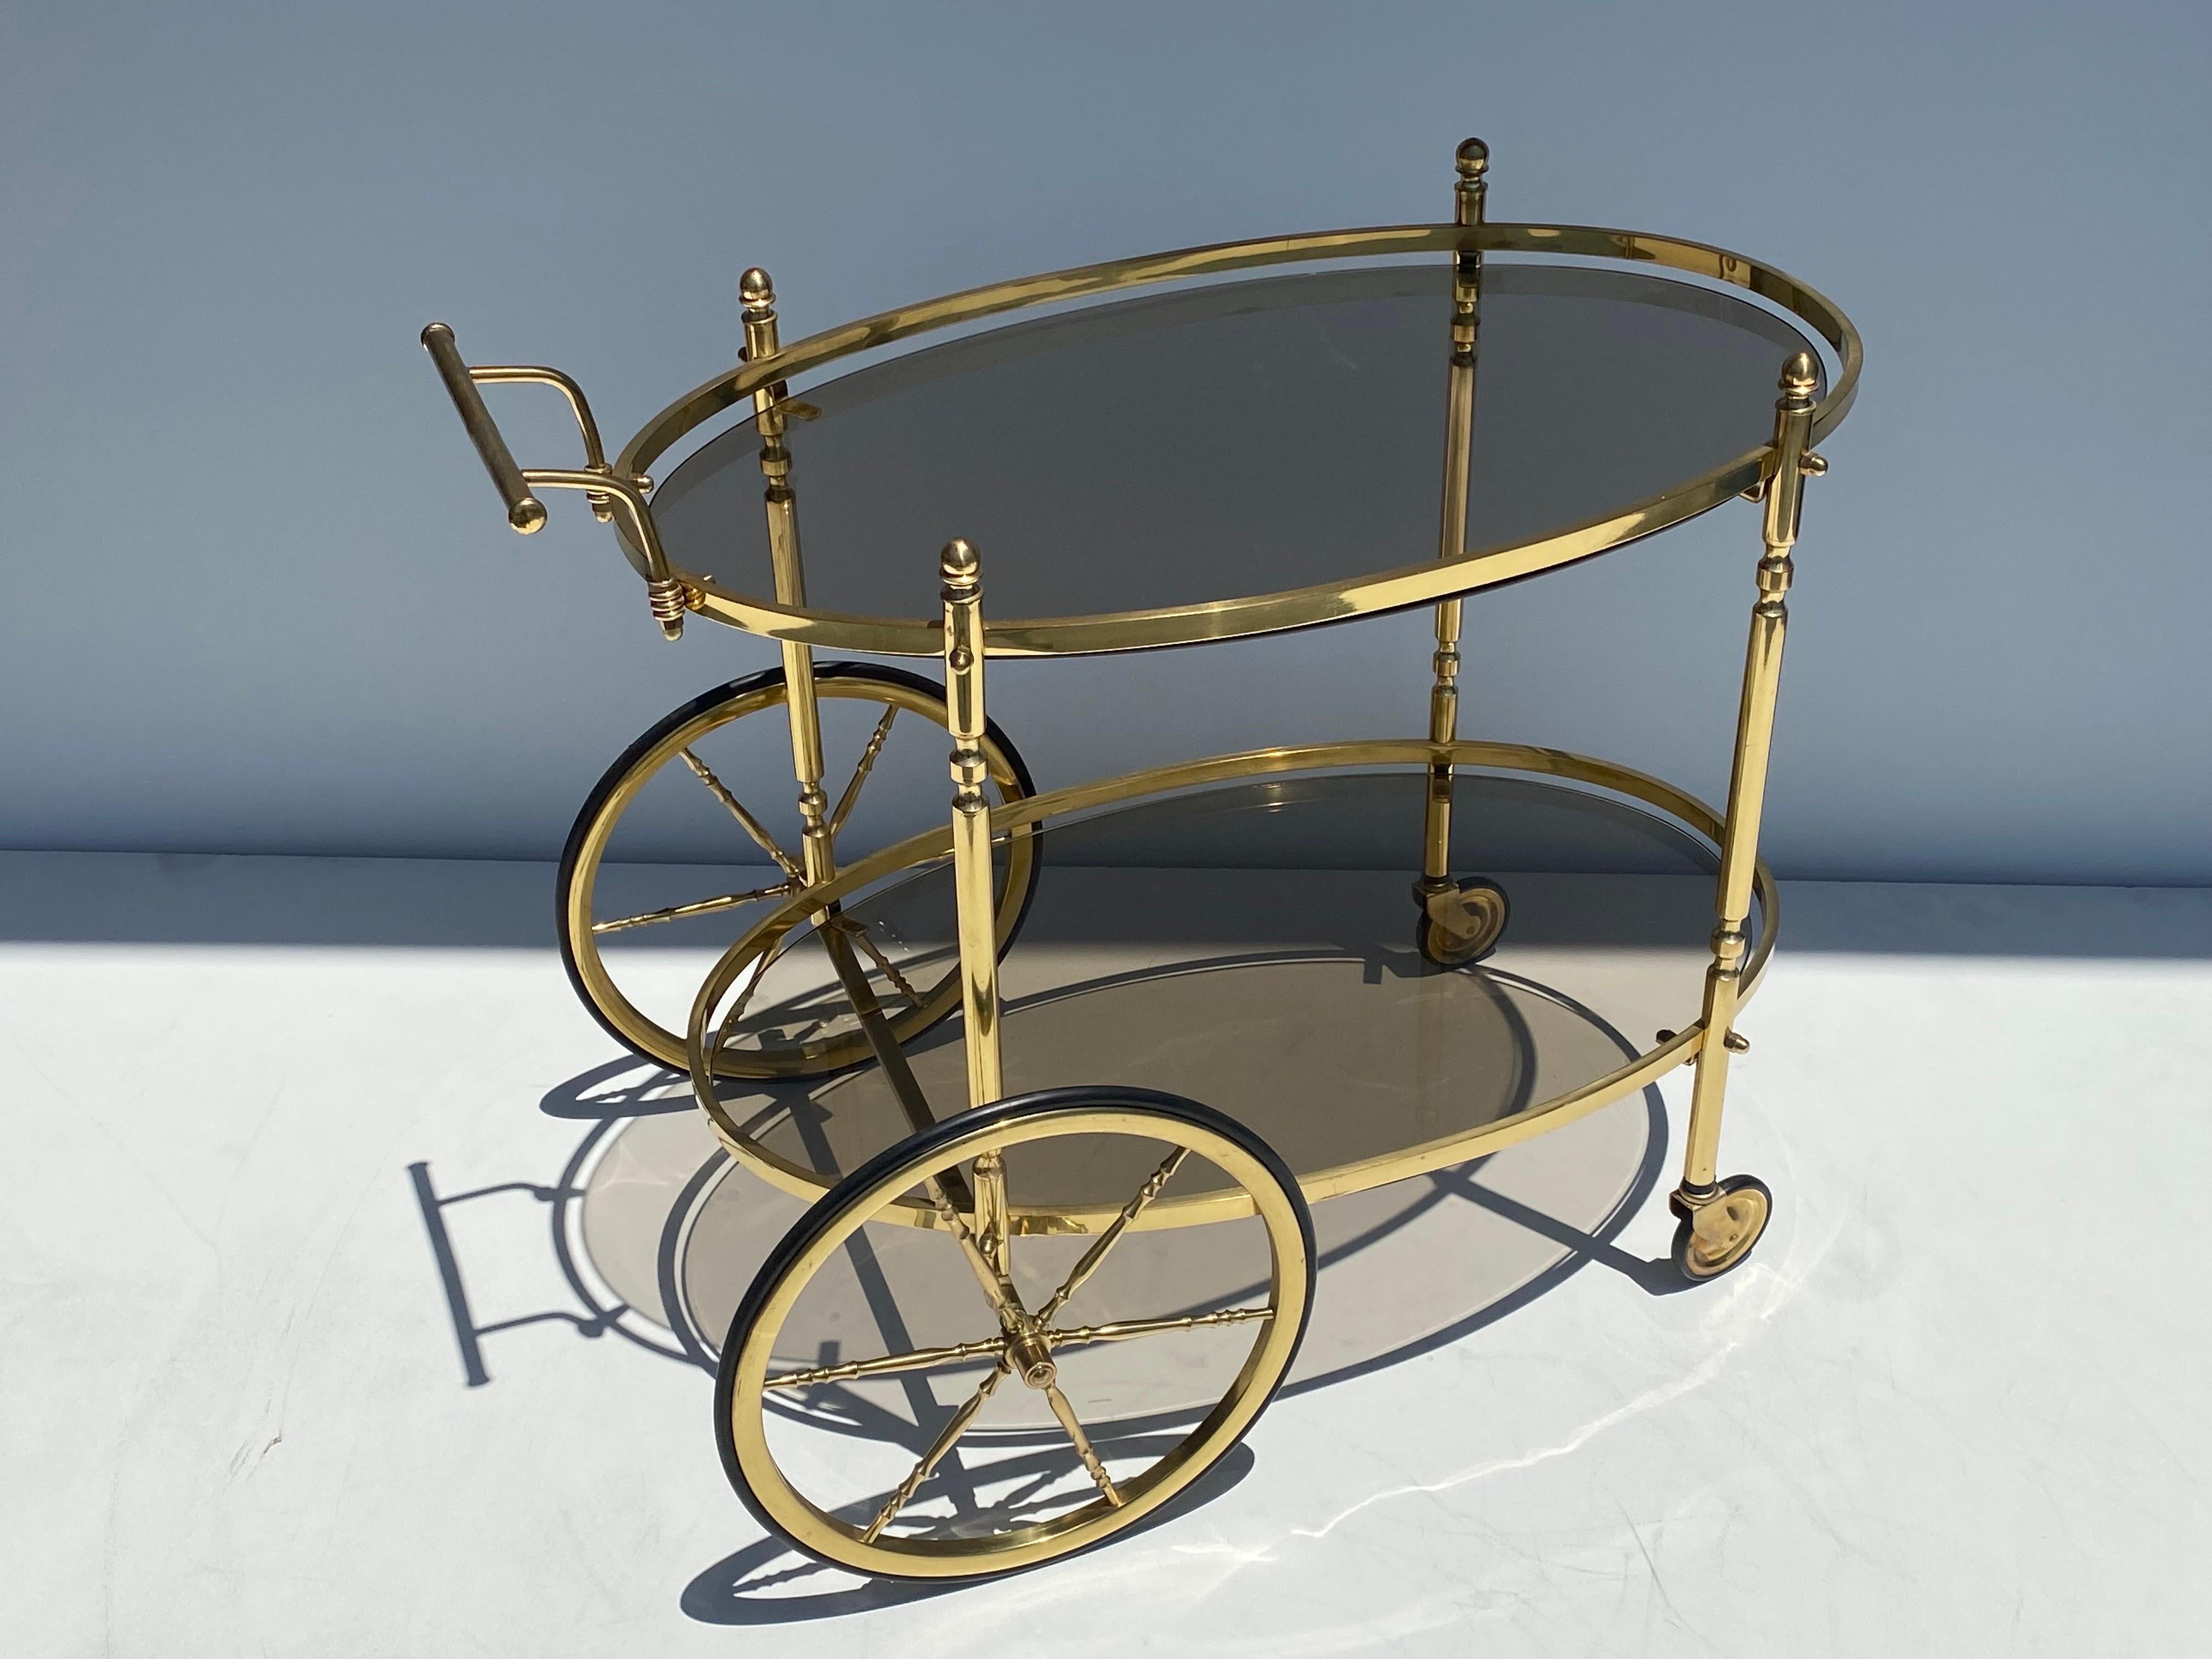 Hollywood Regency Brass and Smoked Glass Bar Cart